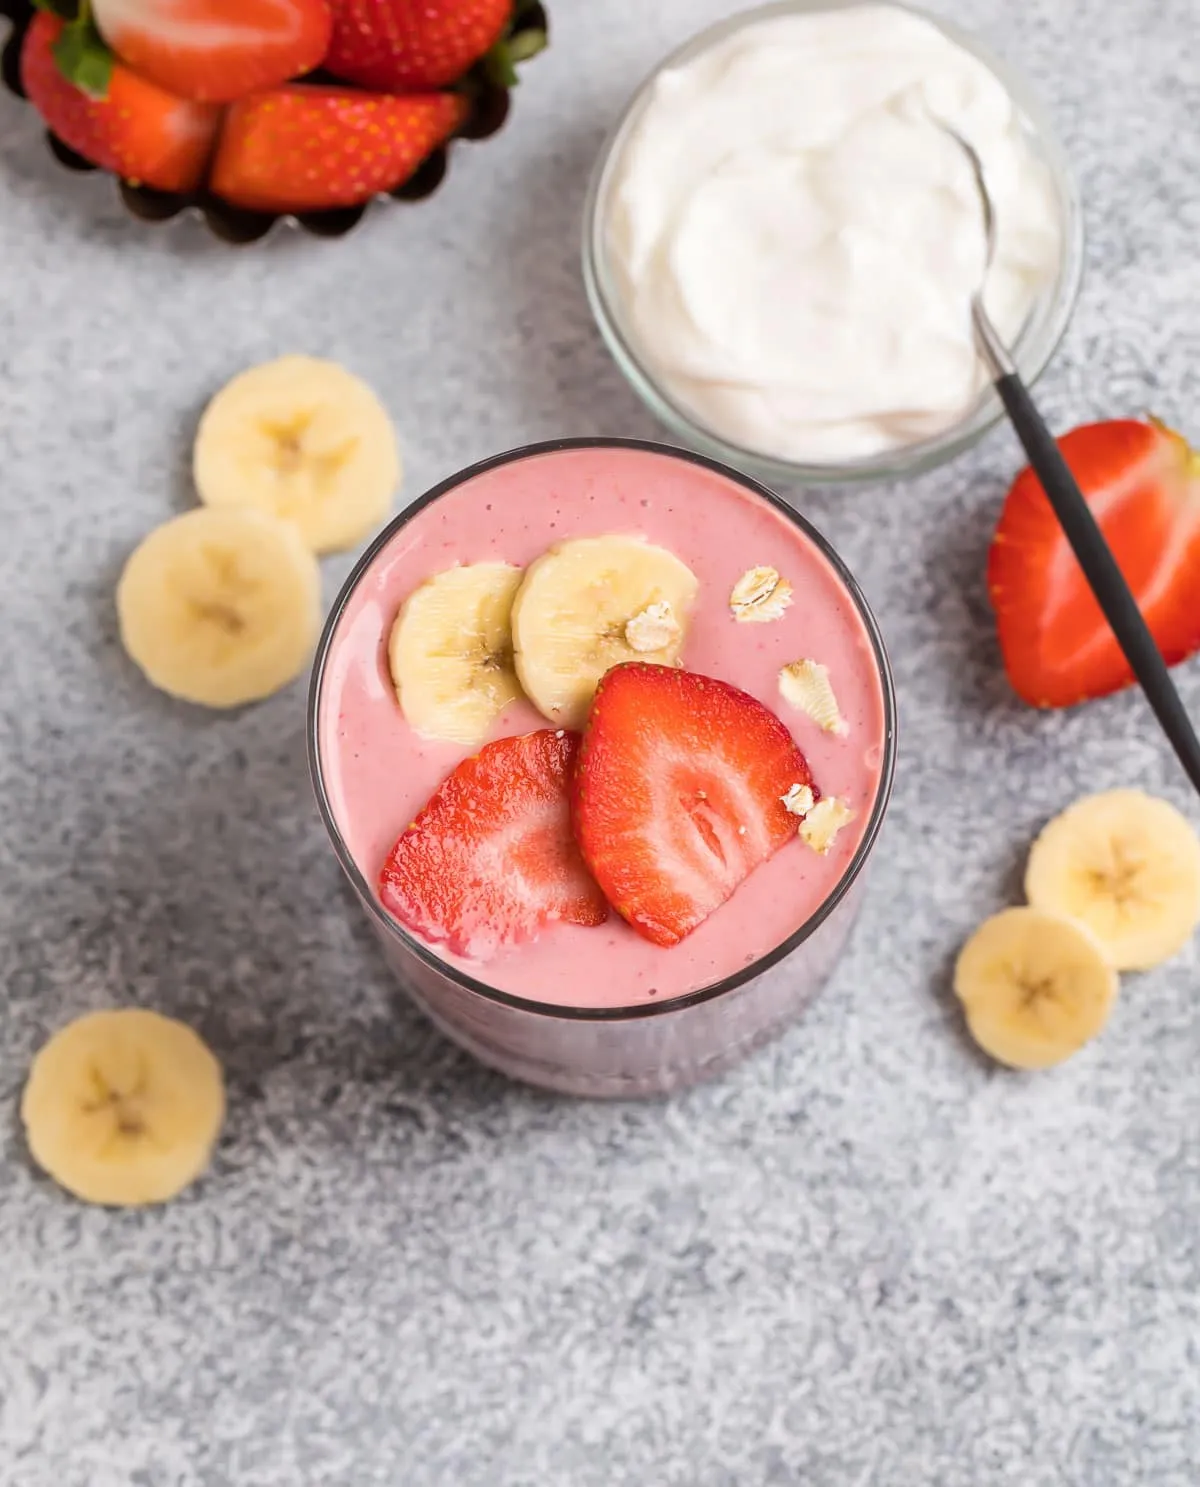 A creamy smoothie served in a glass made with strawberries and bananas